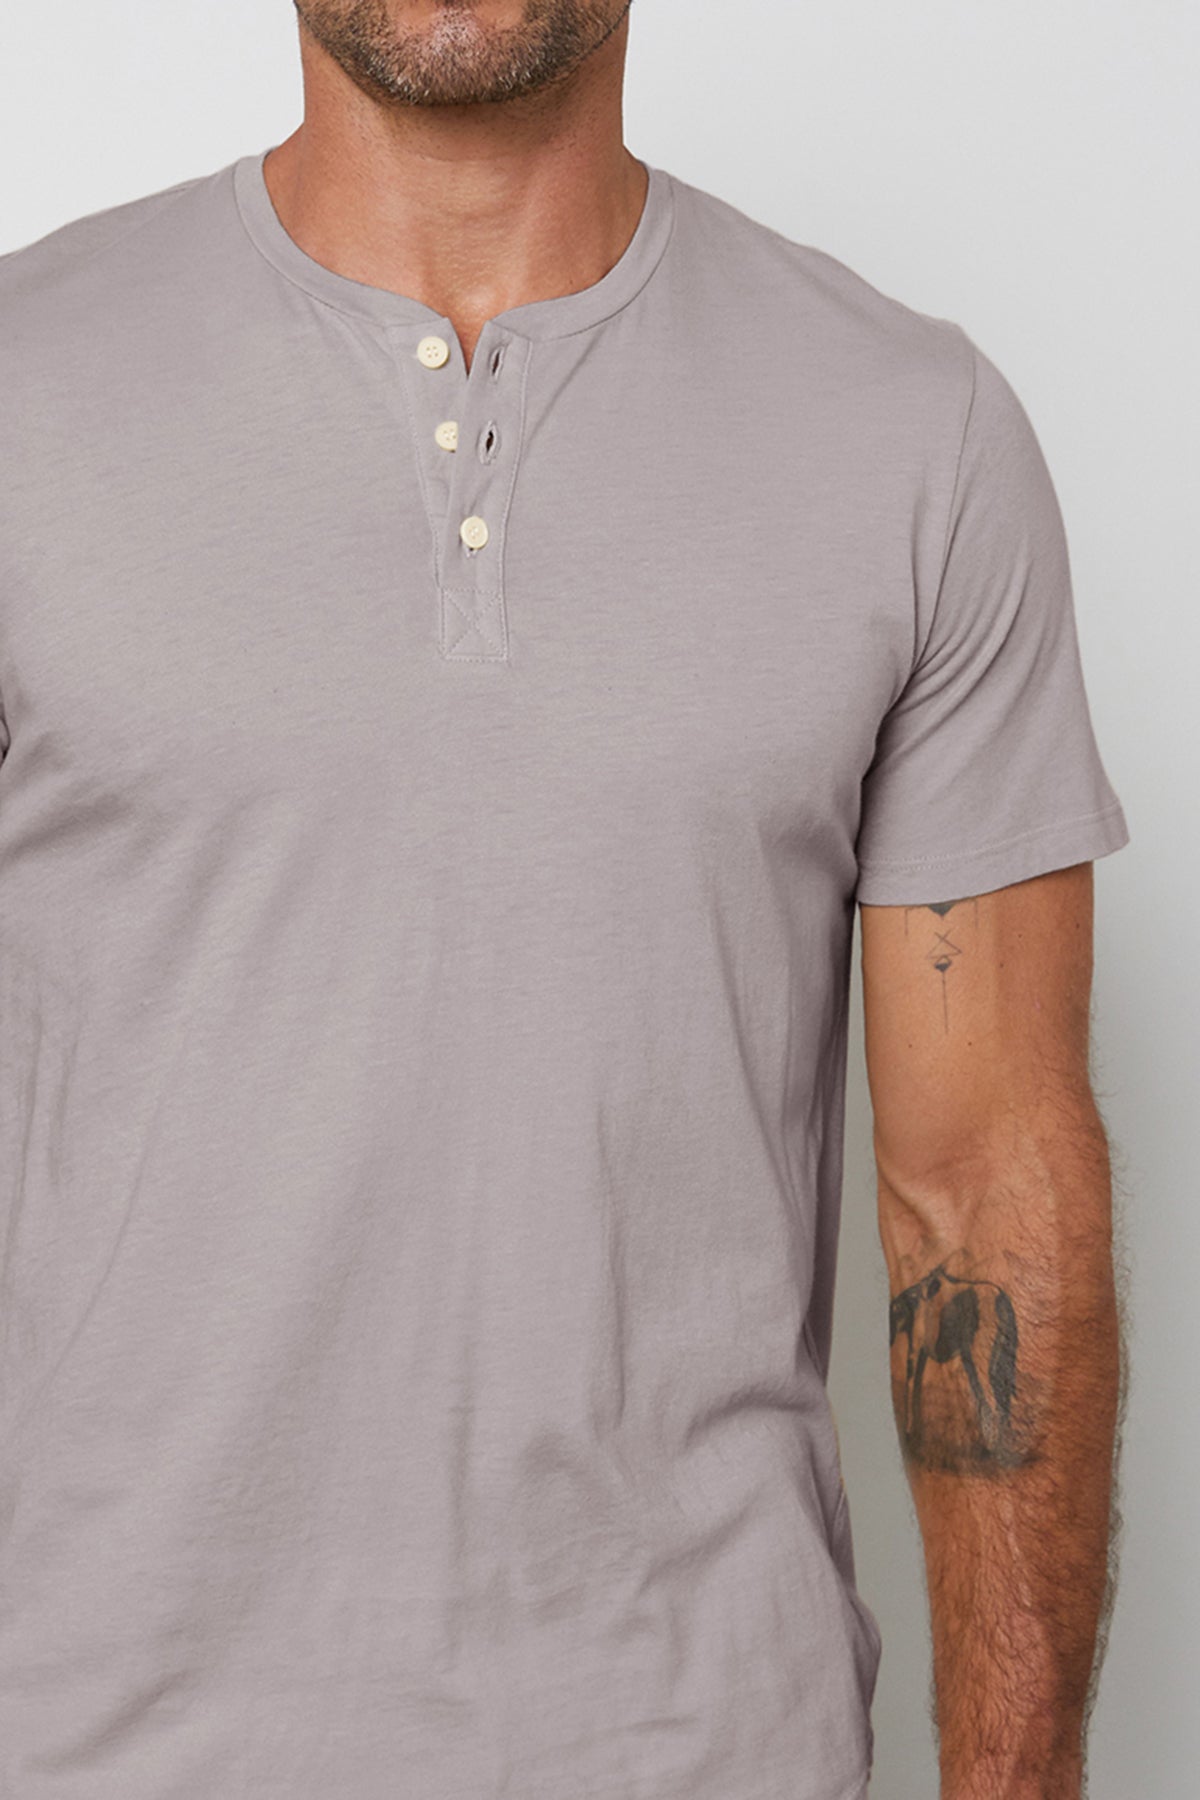 A man wearing a classic grey Velvet by Graham & Spencer Fulton Short Sleeve Henley made of cotton jersey.-26011328184513